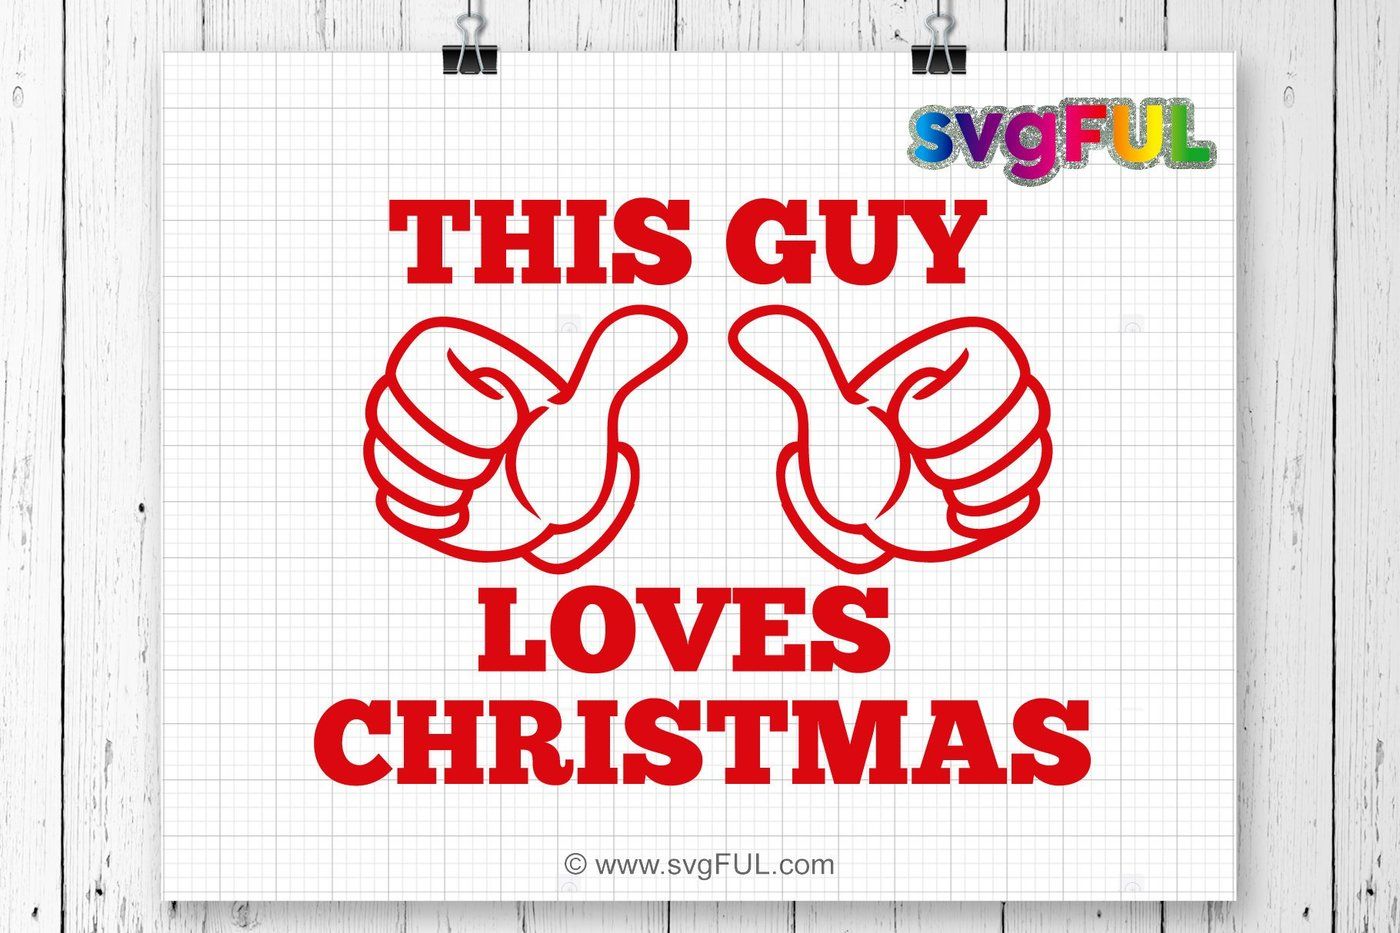 Download This Guy Loves Christmas Svg, Christmas Svg, Funny ...